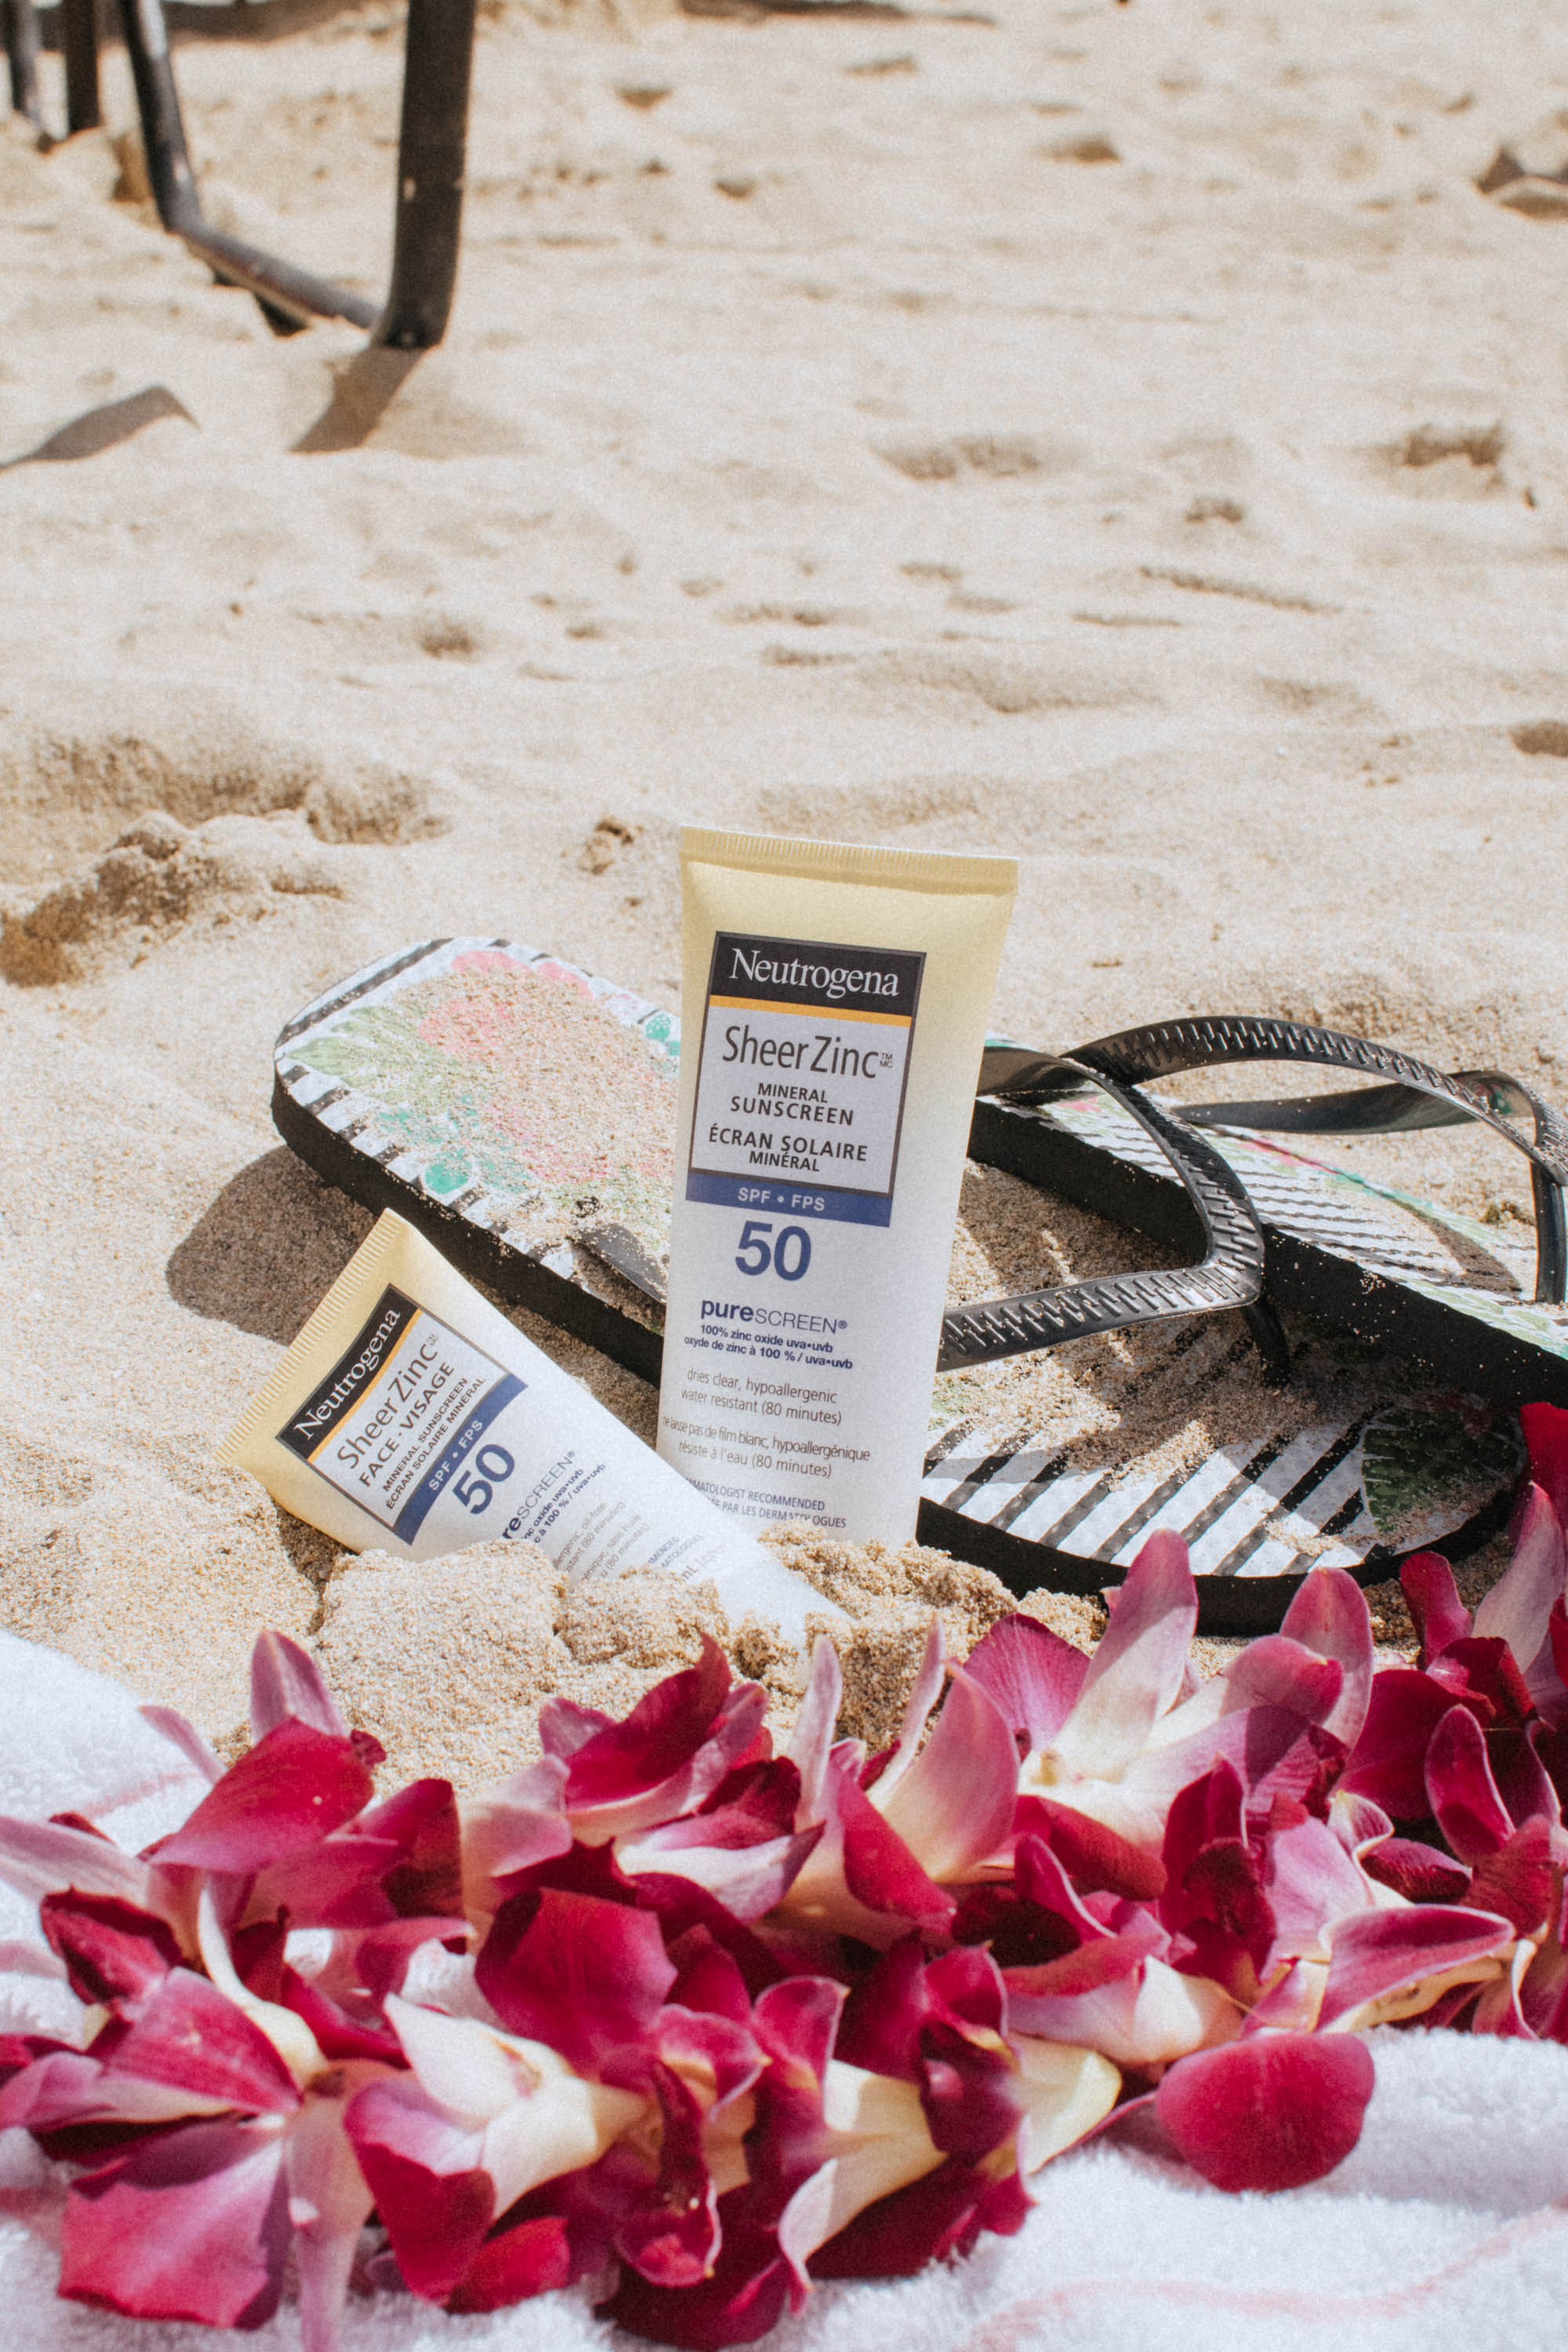 Displaying my favourite Neutrogena Sheer Zinc Mineral Sunscreen for Face and Body by the beach